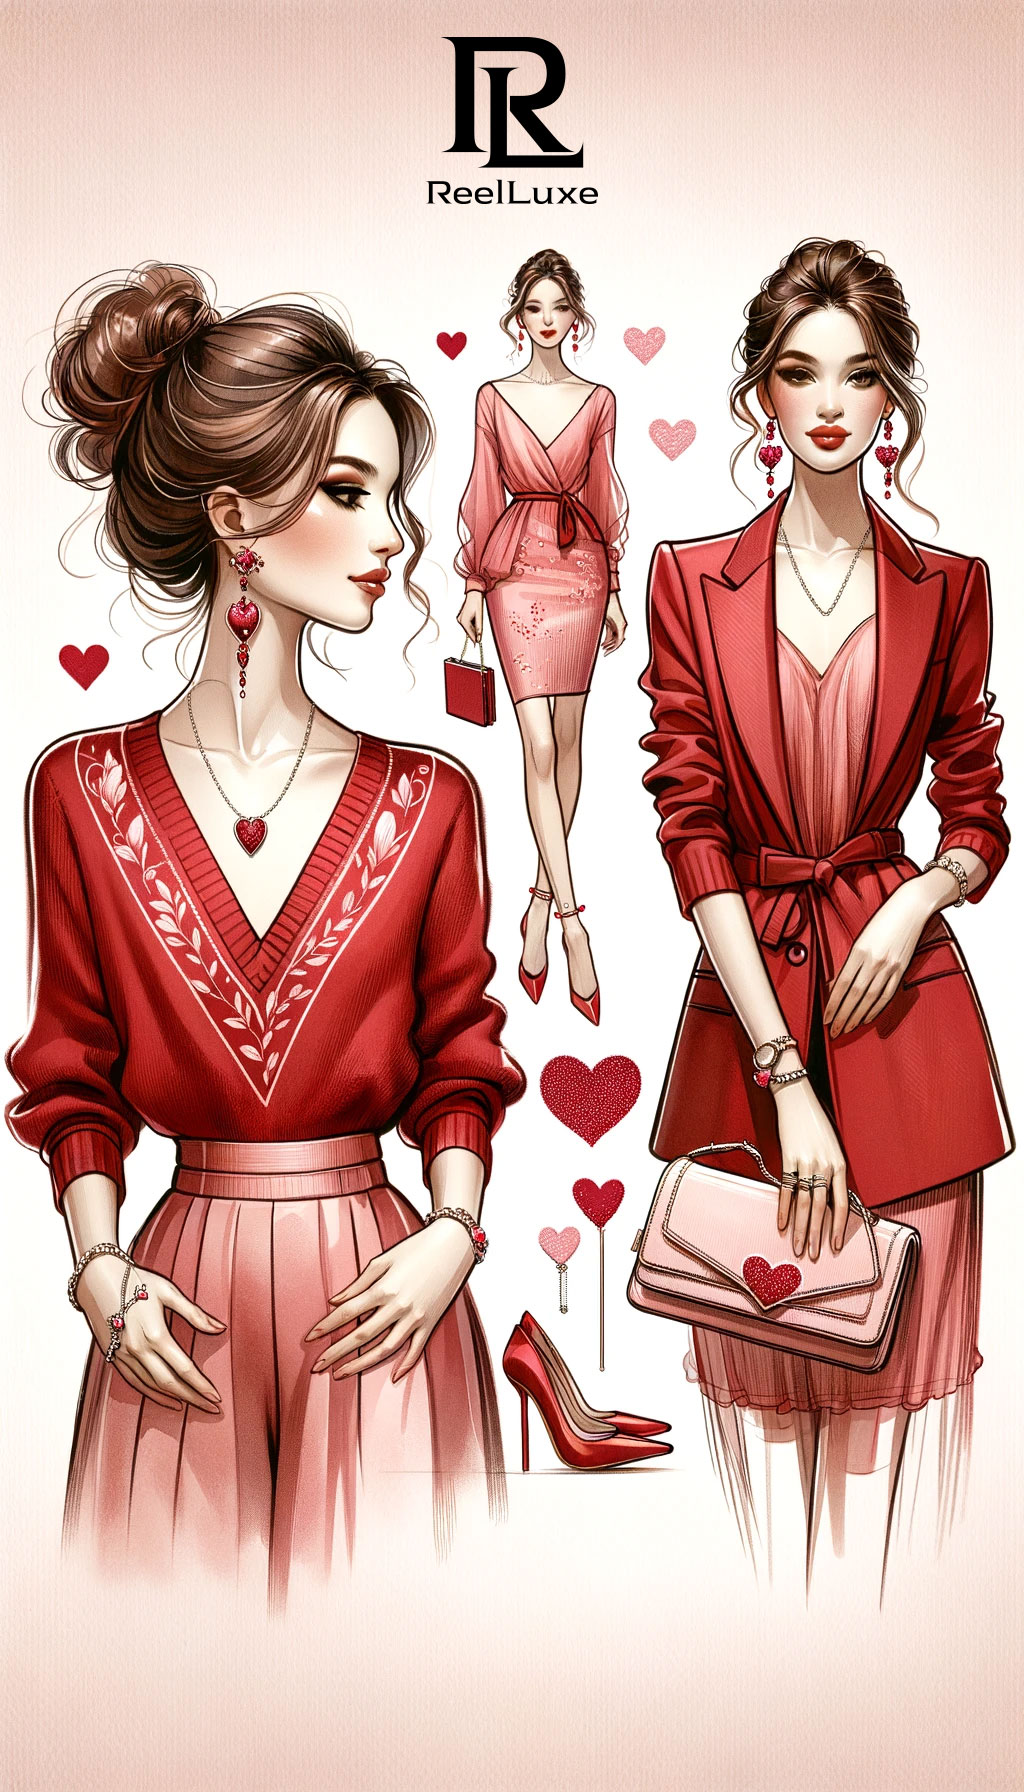 Romance in the Air - Valentine's Day - Beauty and Fashion - 3